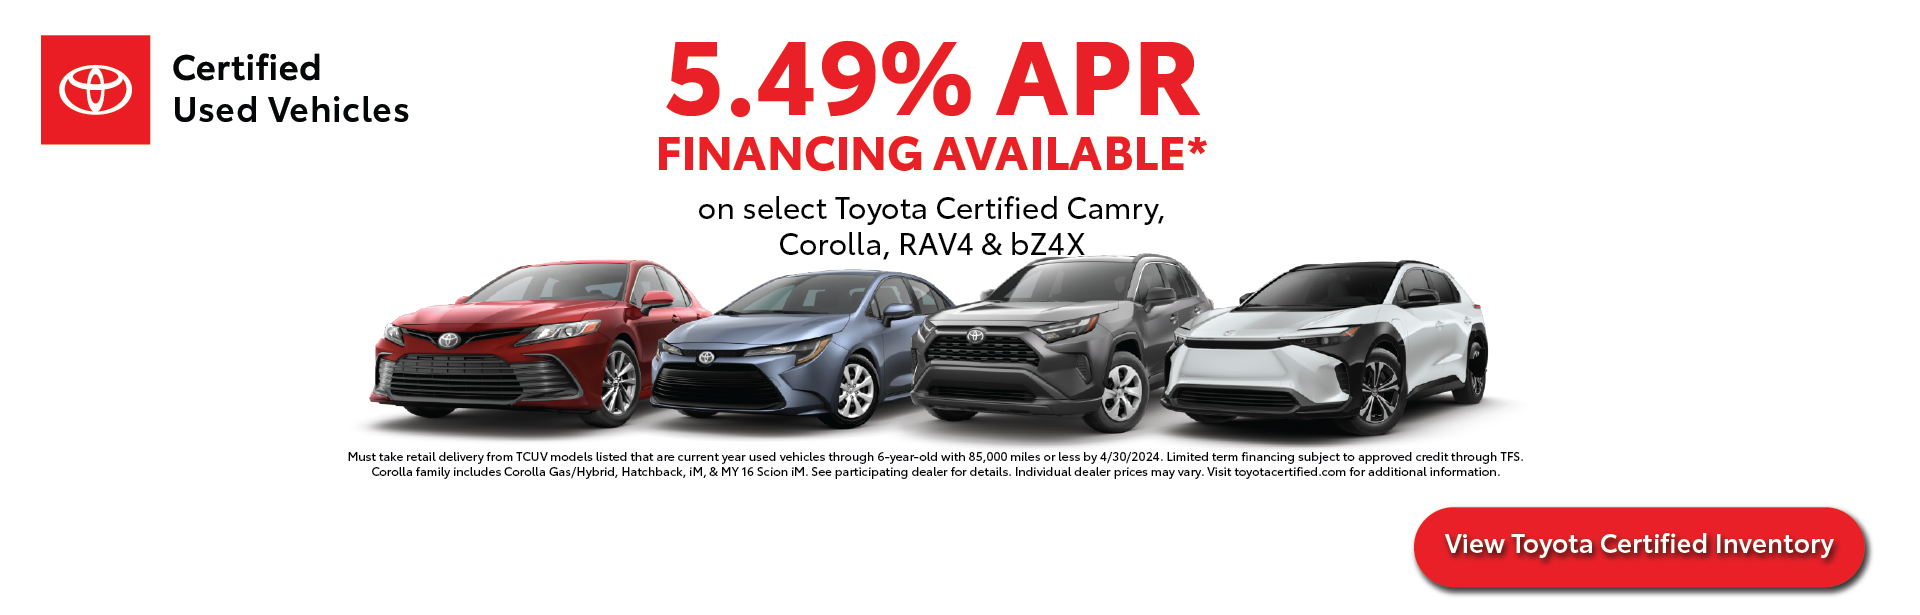 Toyota Certified Used Vehicle Offer | Markquart Toyota in Chippewa Falls WI